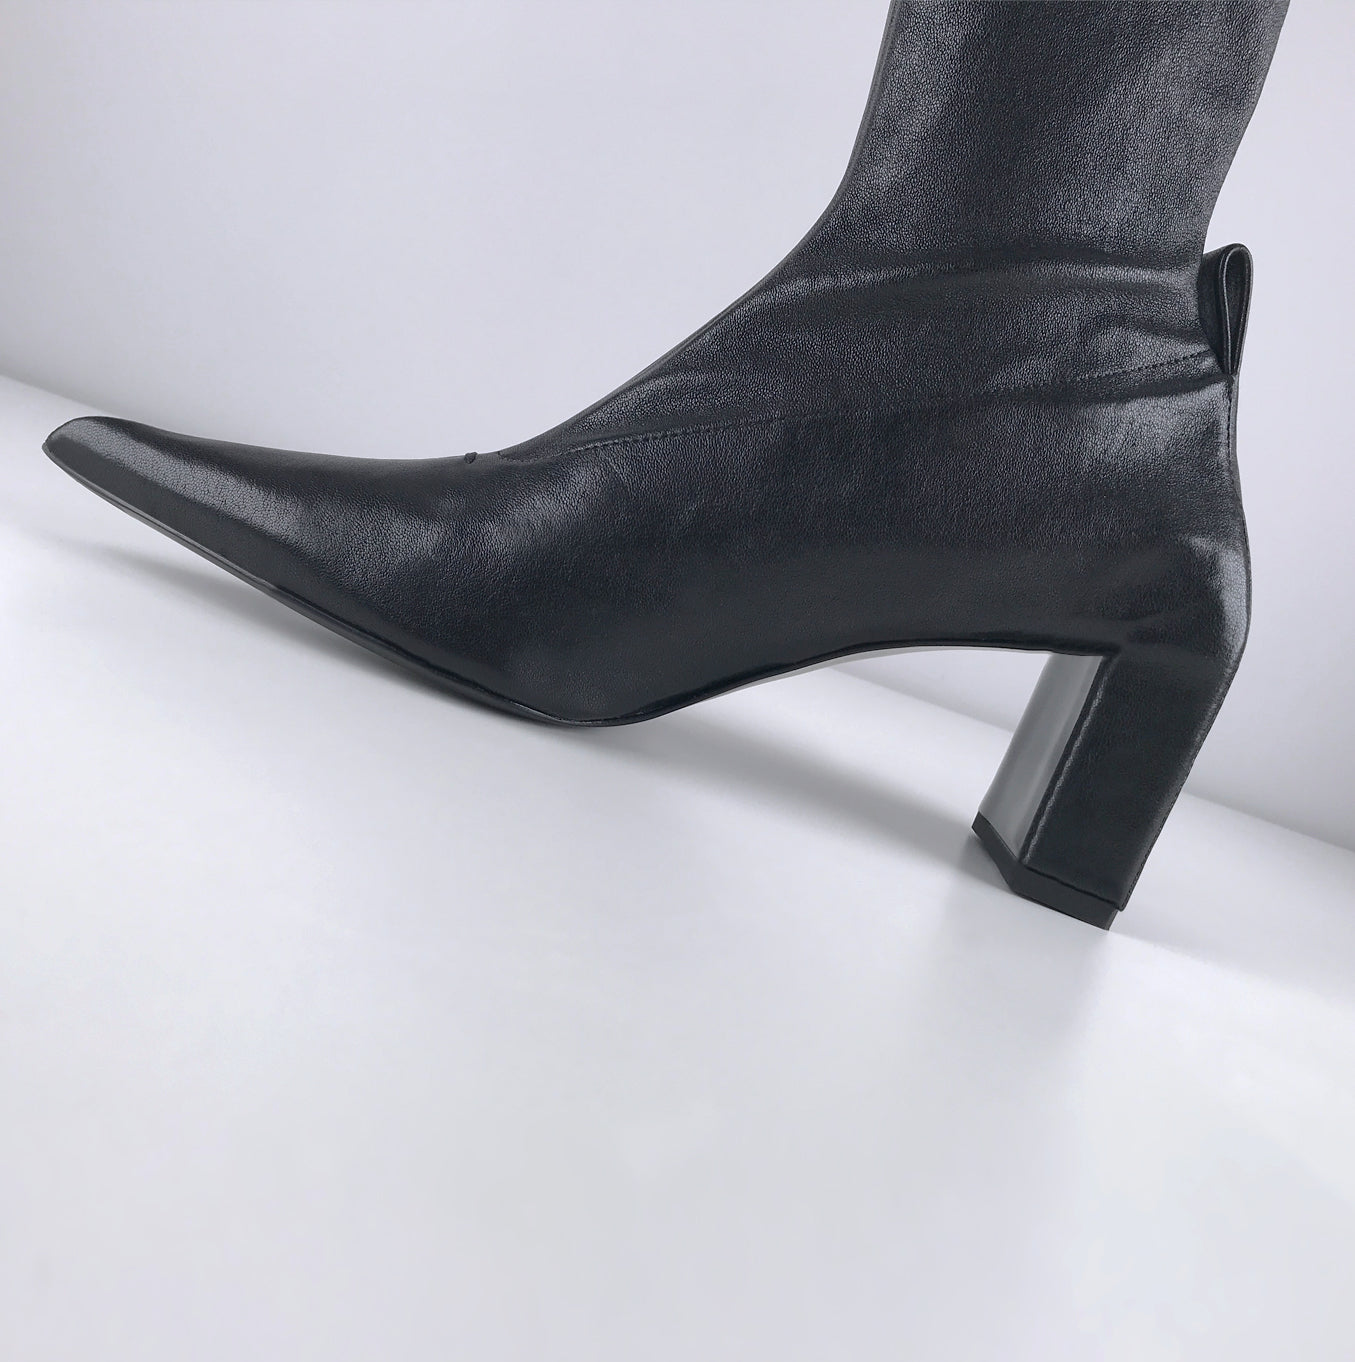 ANKLE BOOT HEEL